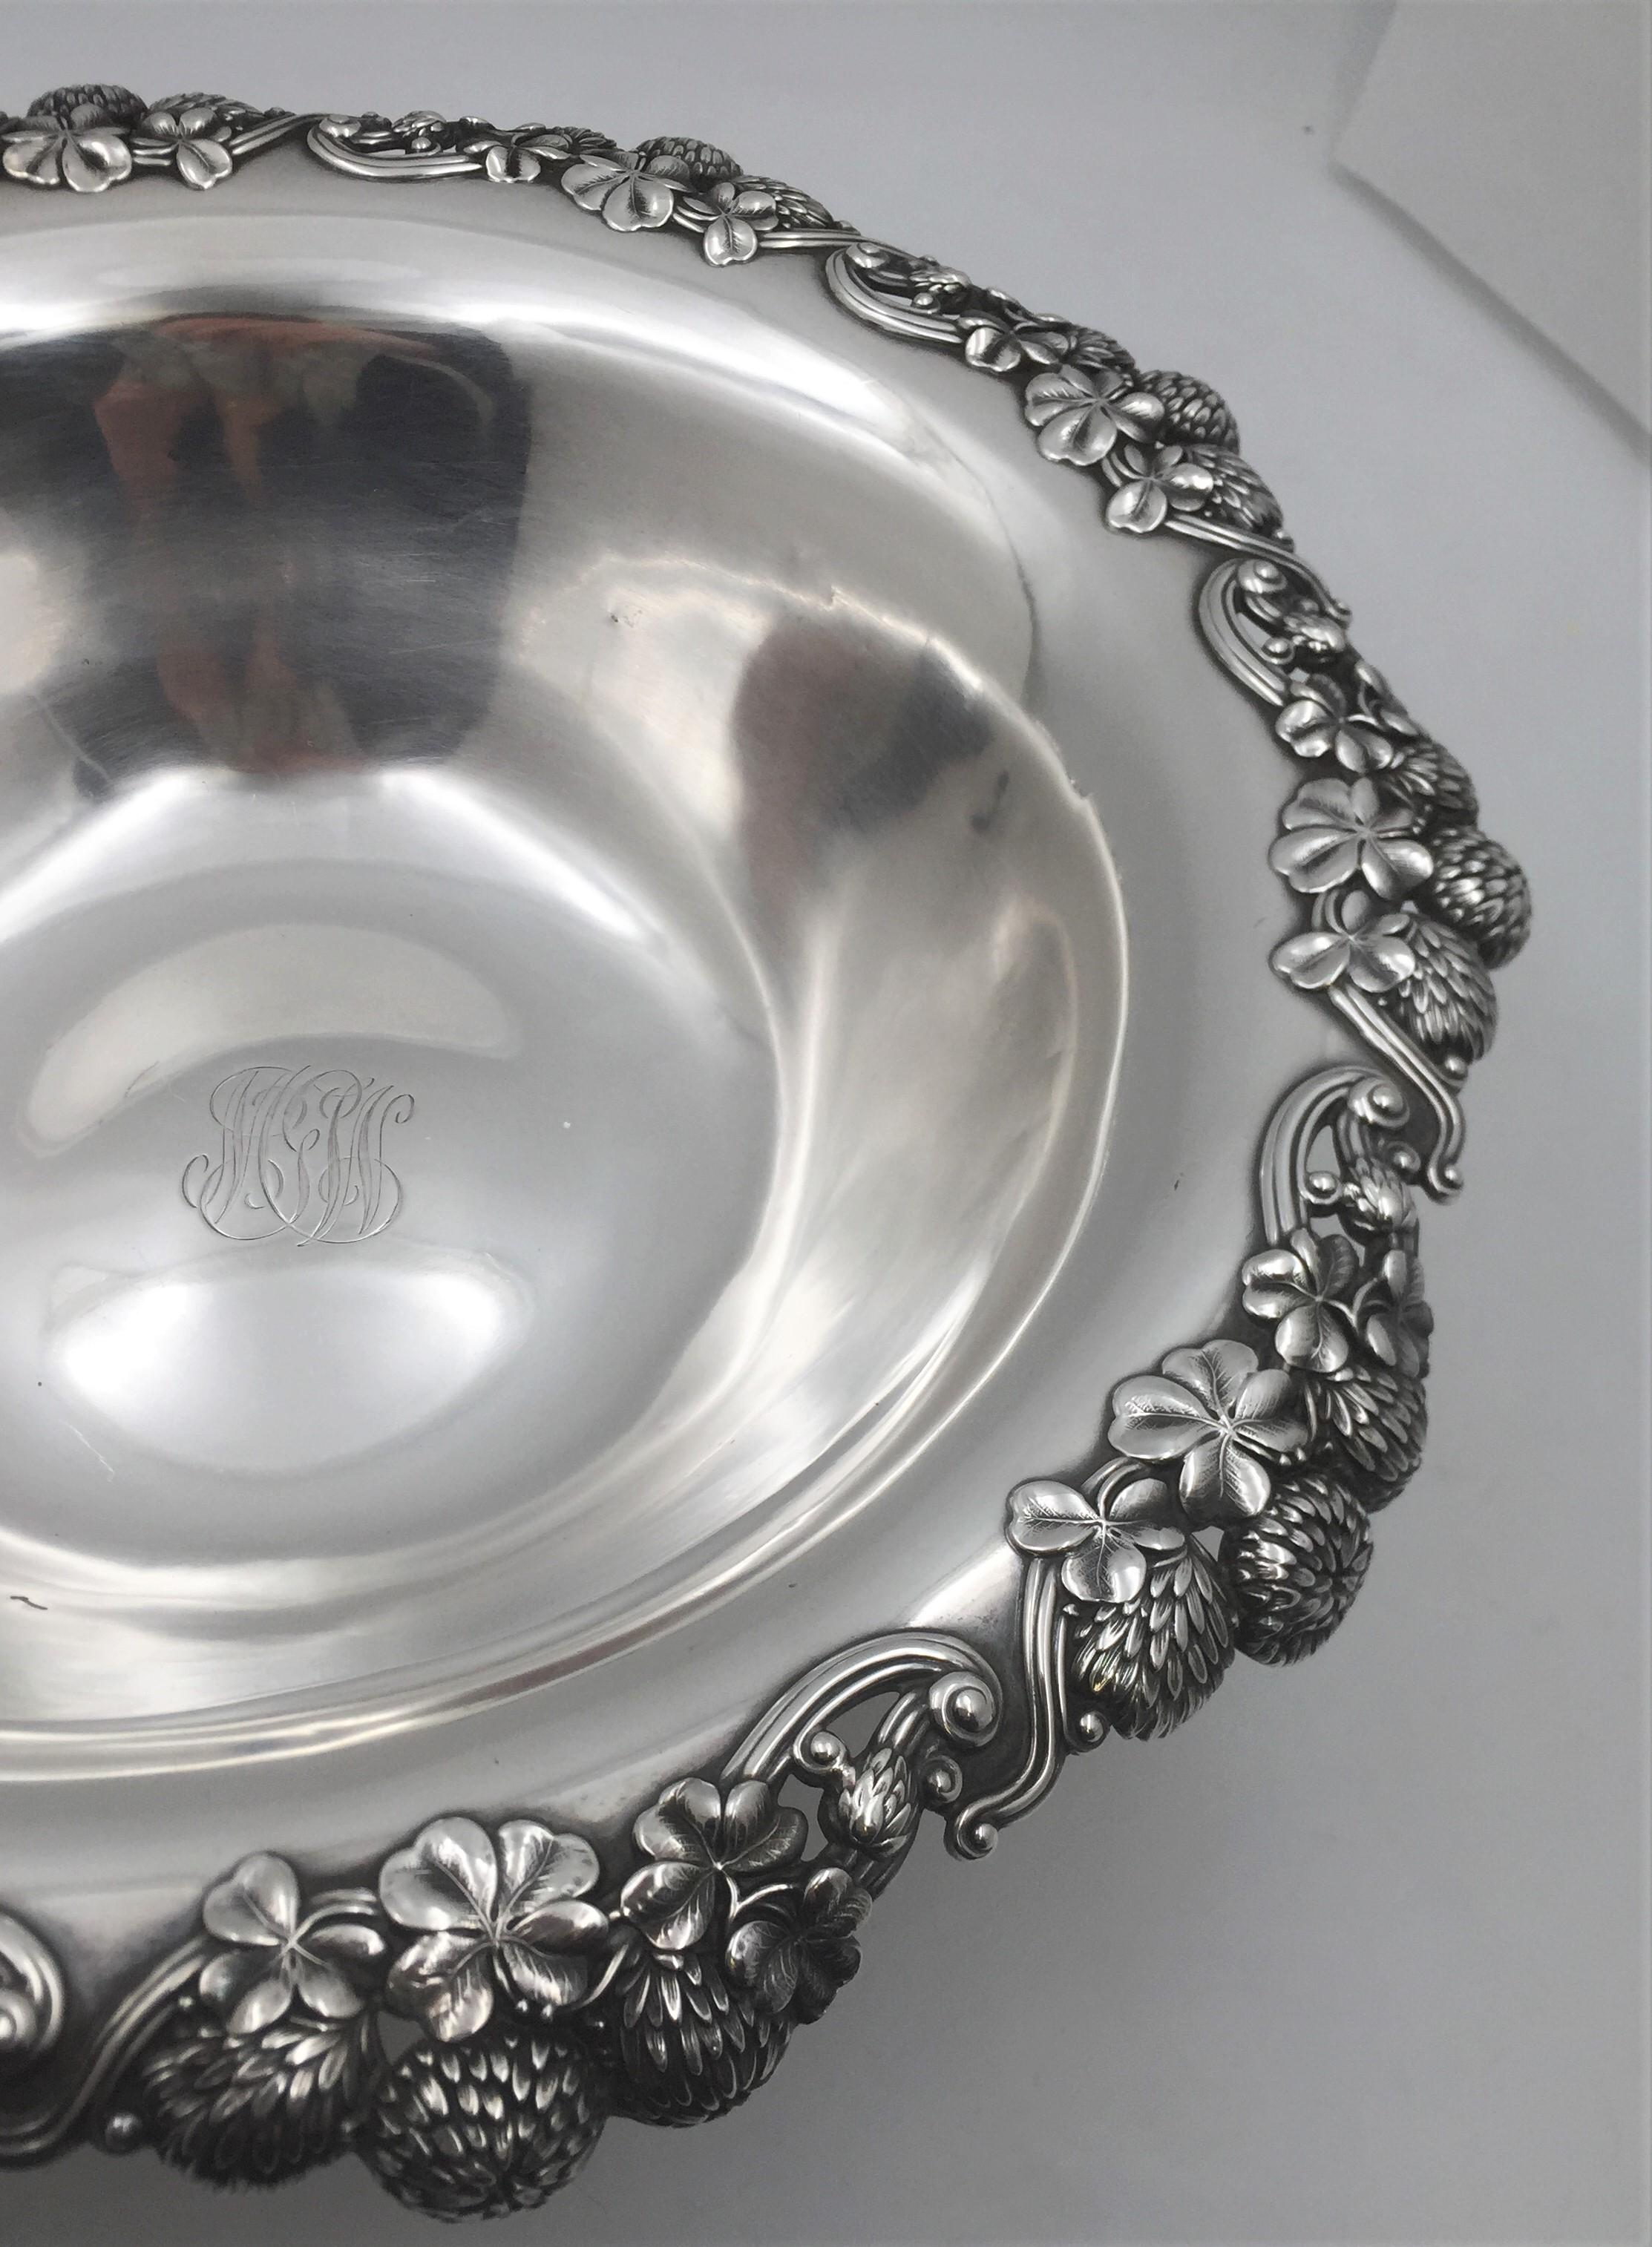 Tiffany & Co. 1898 Sterling Silver Large Clover Centerpiece Bowl Art Nouveau In Good Condition For Sale In New York, NY